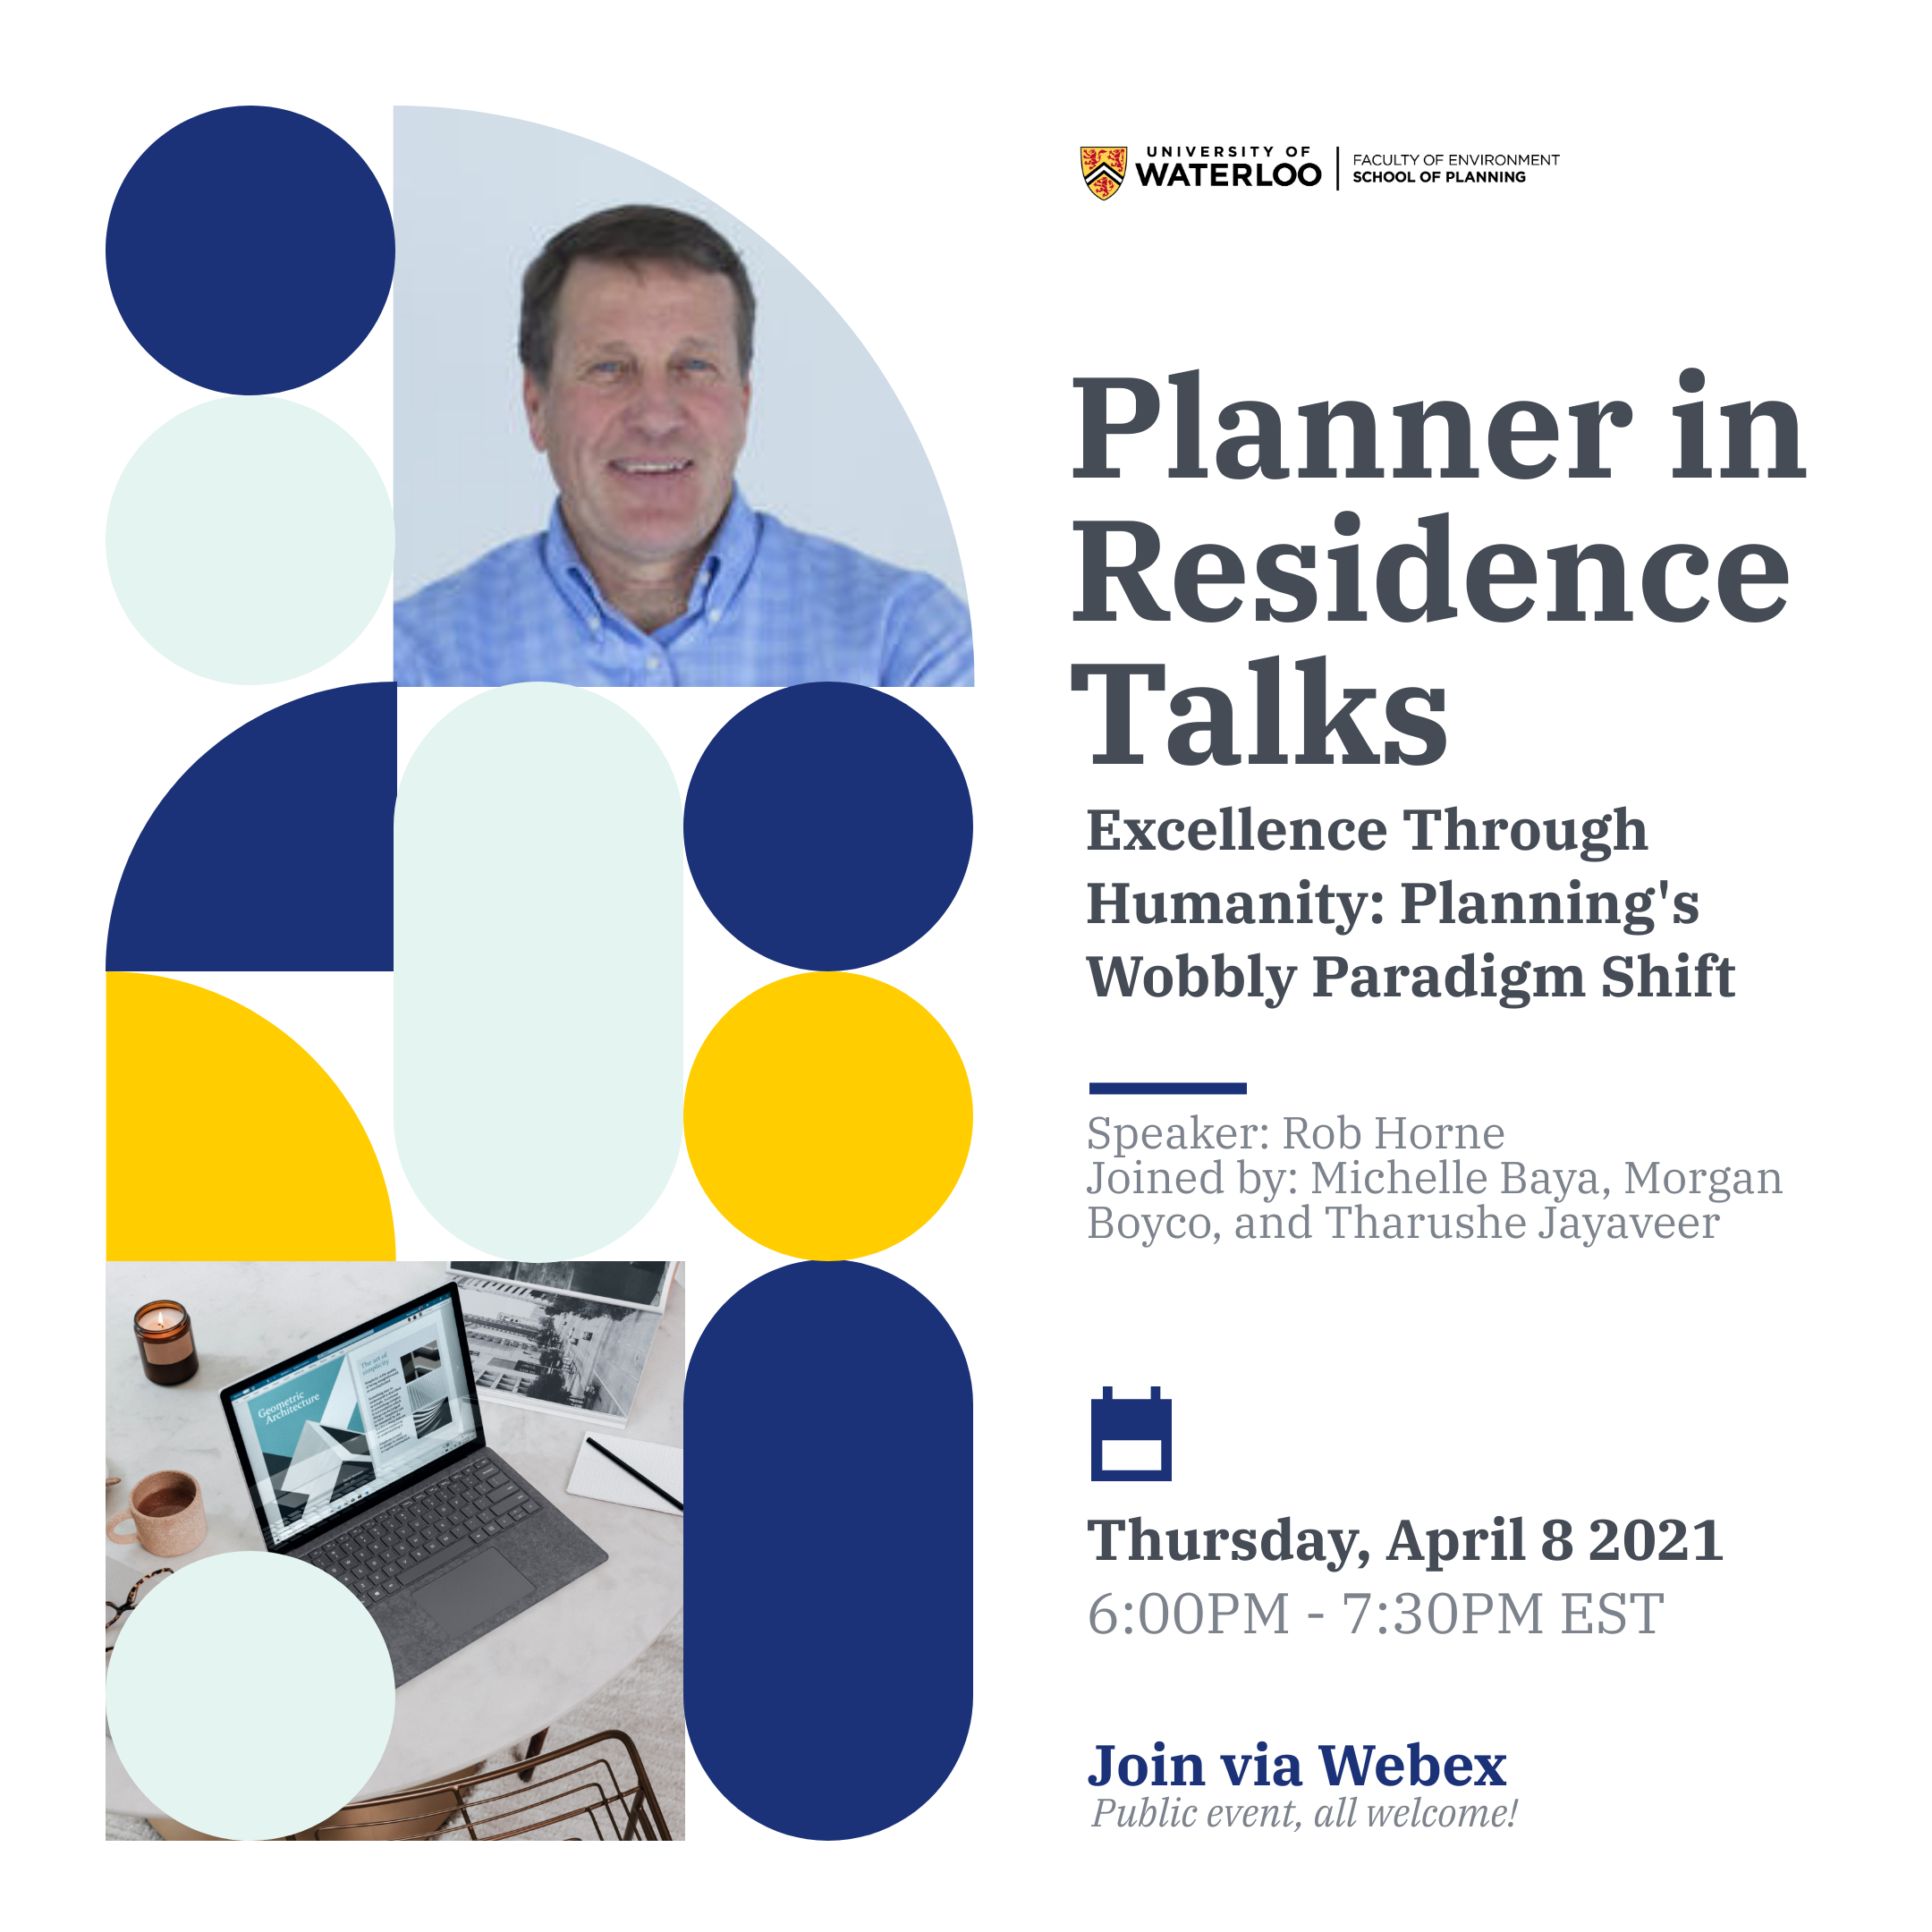 Planner in Residence Informational psoter